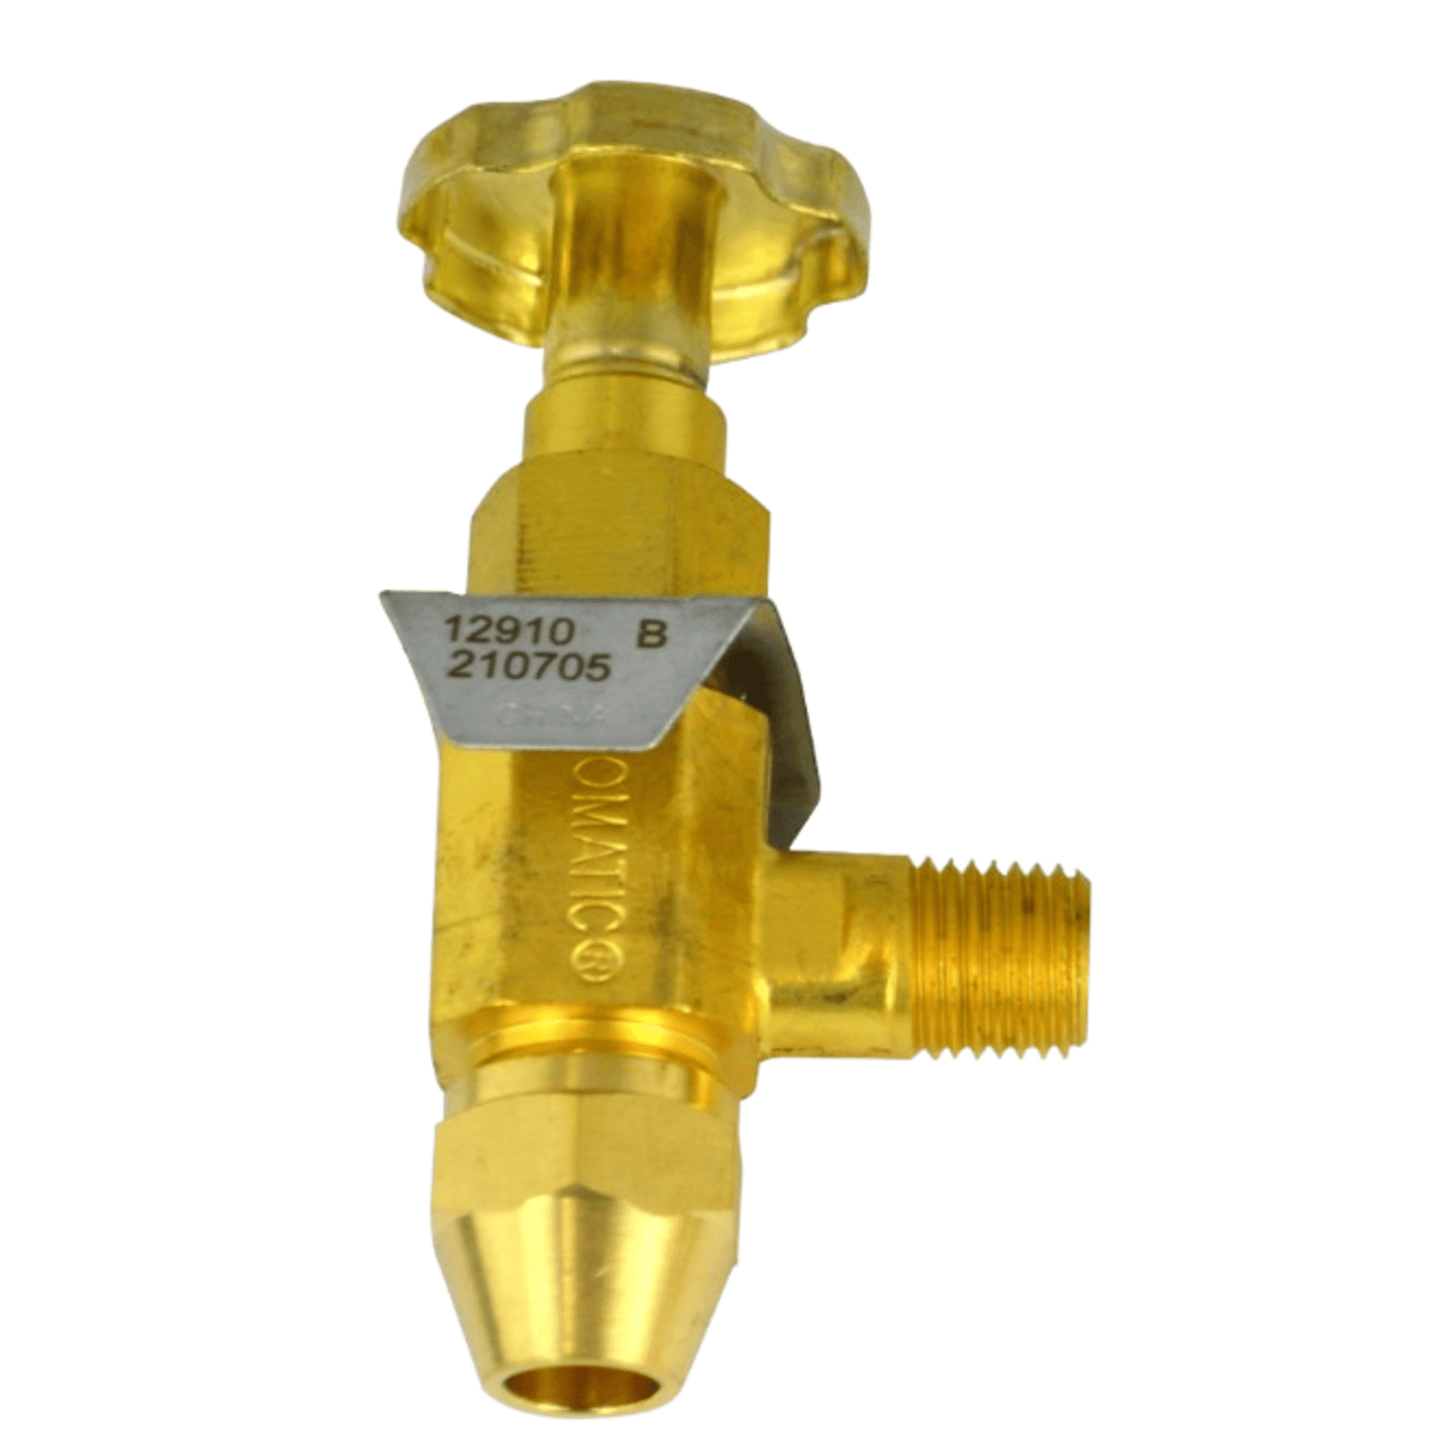 Beckett  12910,  Firomatic® Fire Safety Fusible Burner (Angle) Valve UL 200F - 3/8 ODF X 1/4 MPT - 3/4"